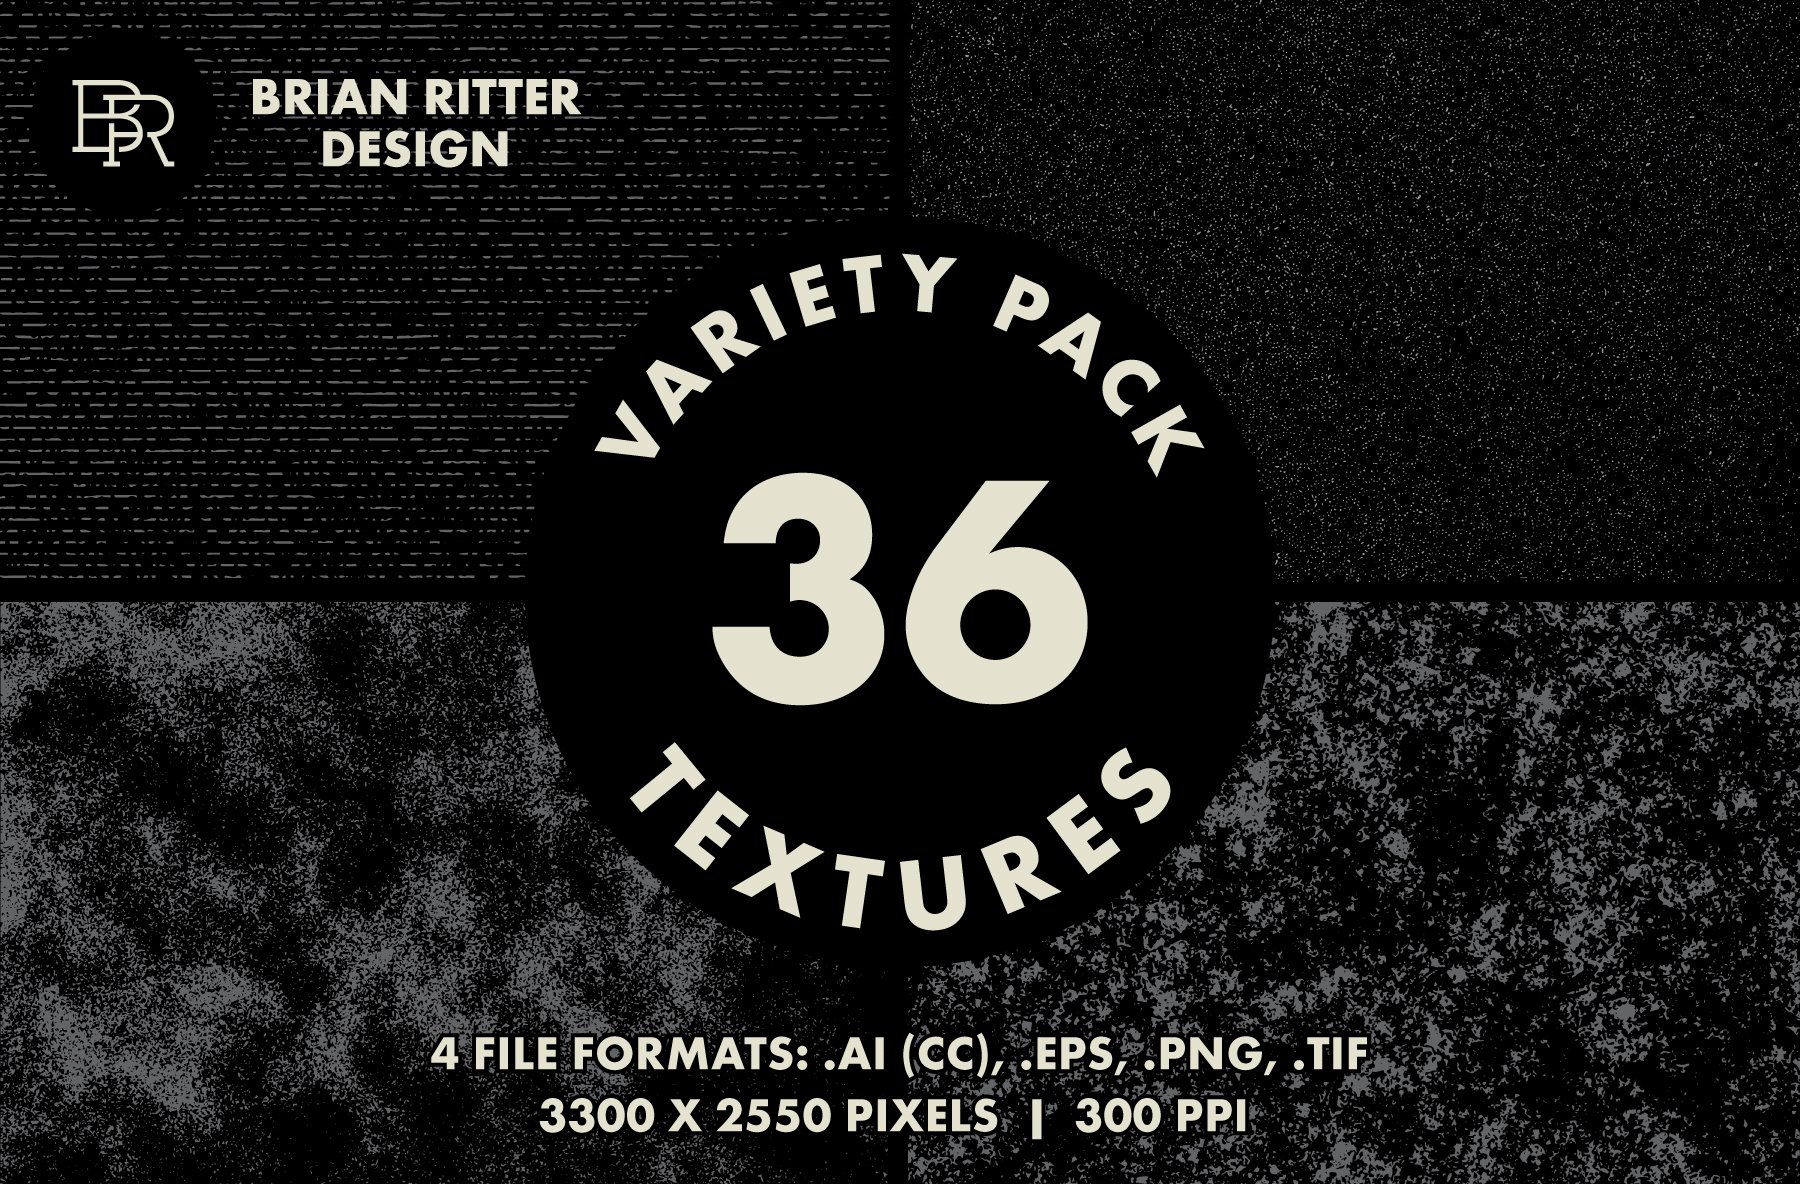 Textures Variety Pack - Vol. 1 cover image.